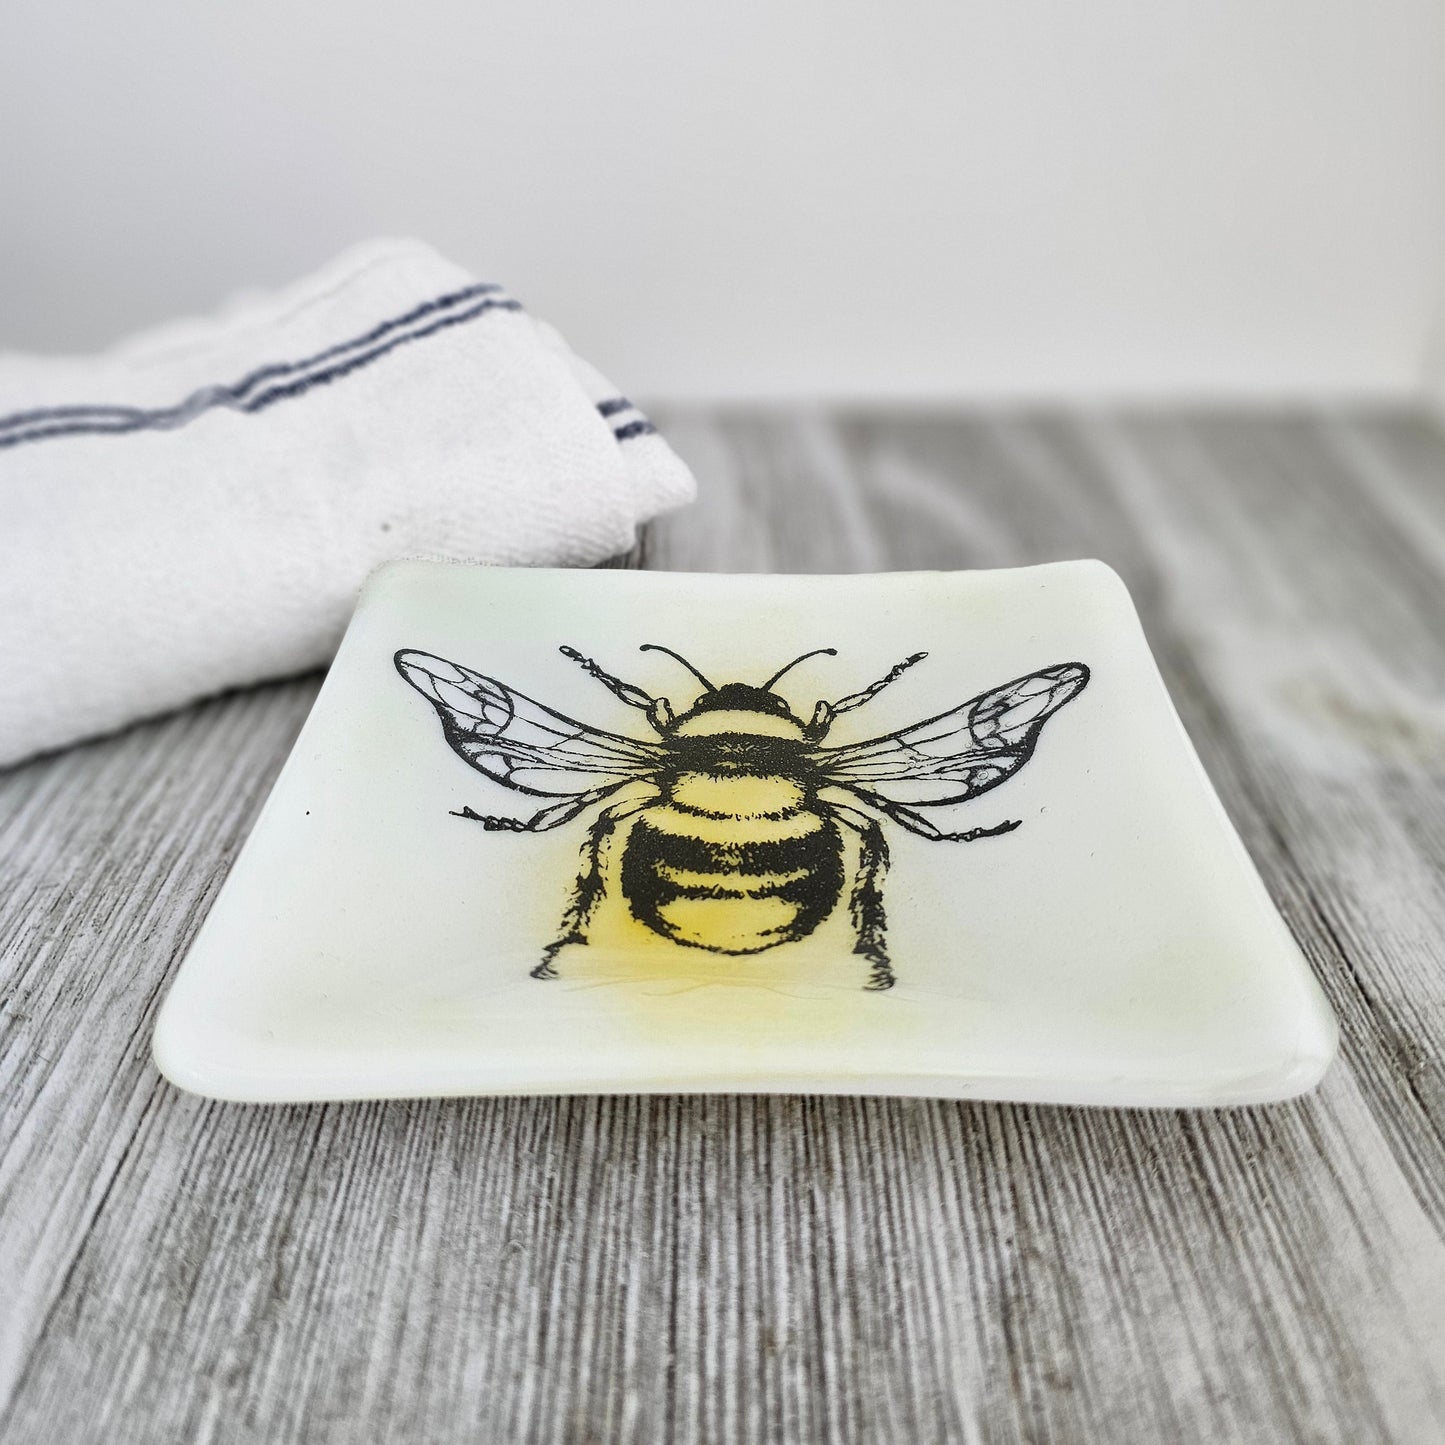 handcrafted dish features a screen-printed bumblebee that has been fused into the glass. The bee’s details add a touch of nature-inspired beauty to this functional piece. trinket dish, a jewelry holder, or simply displayed